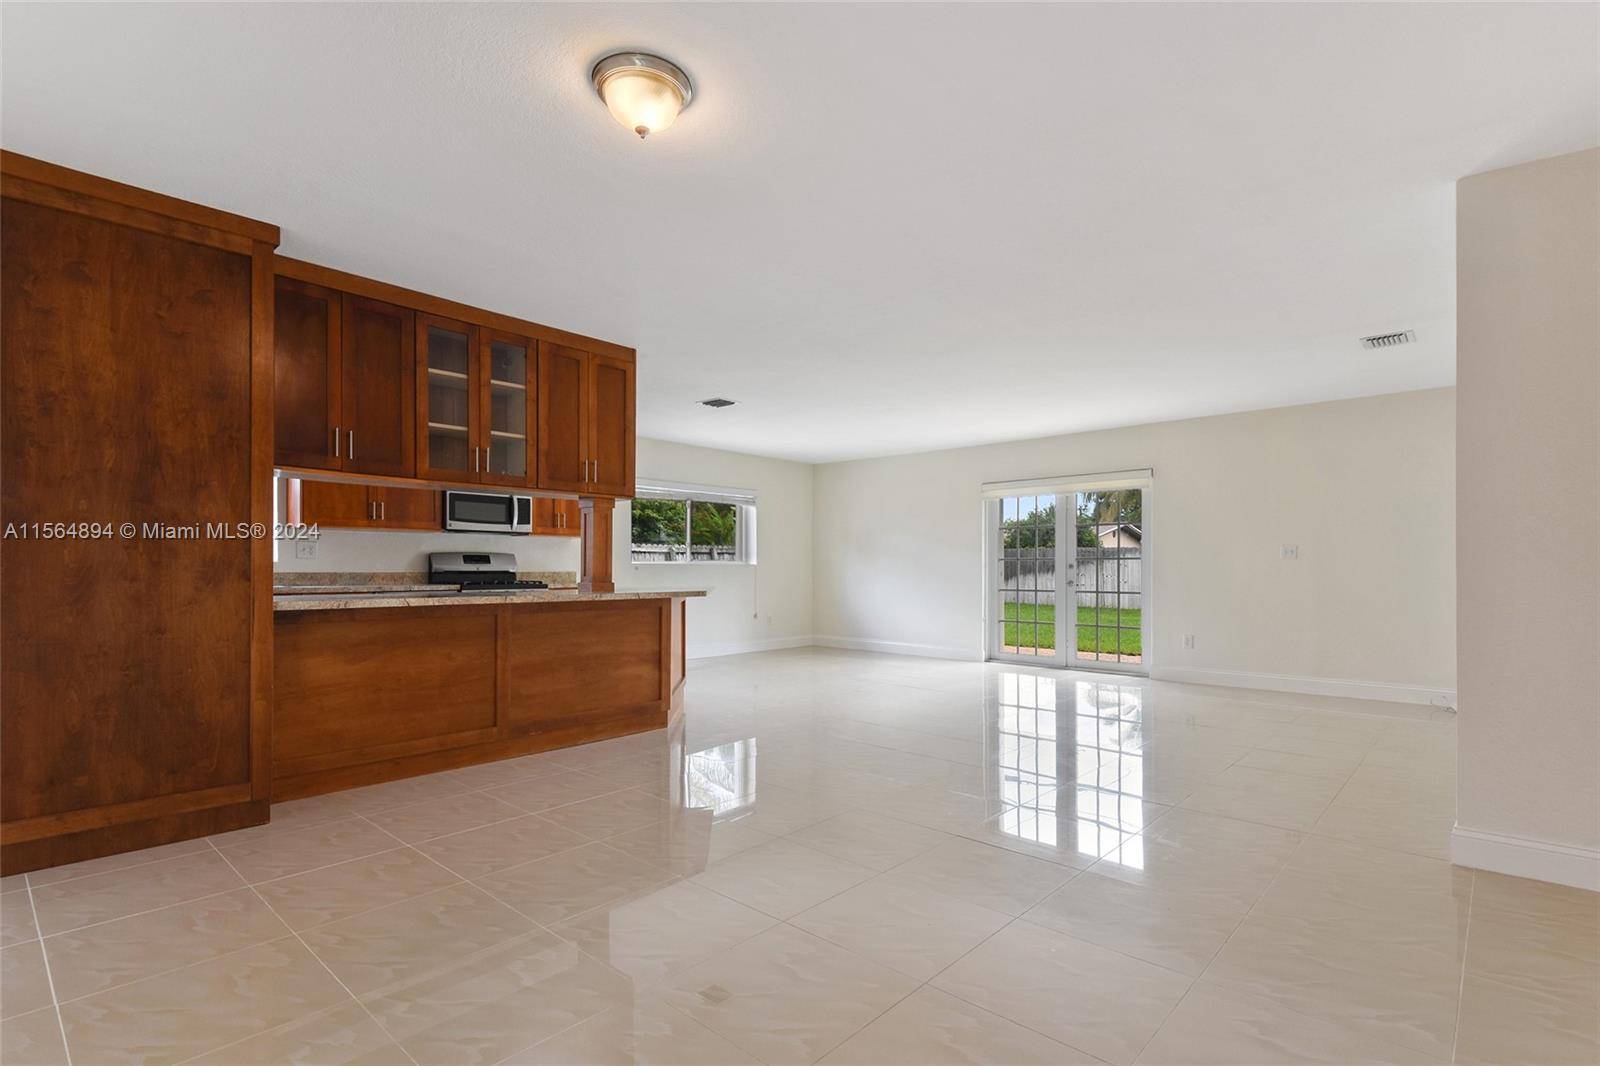 Discover your dream home in Cutler Bay !